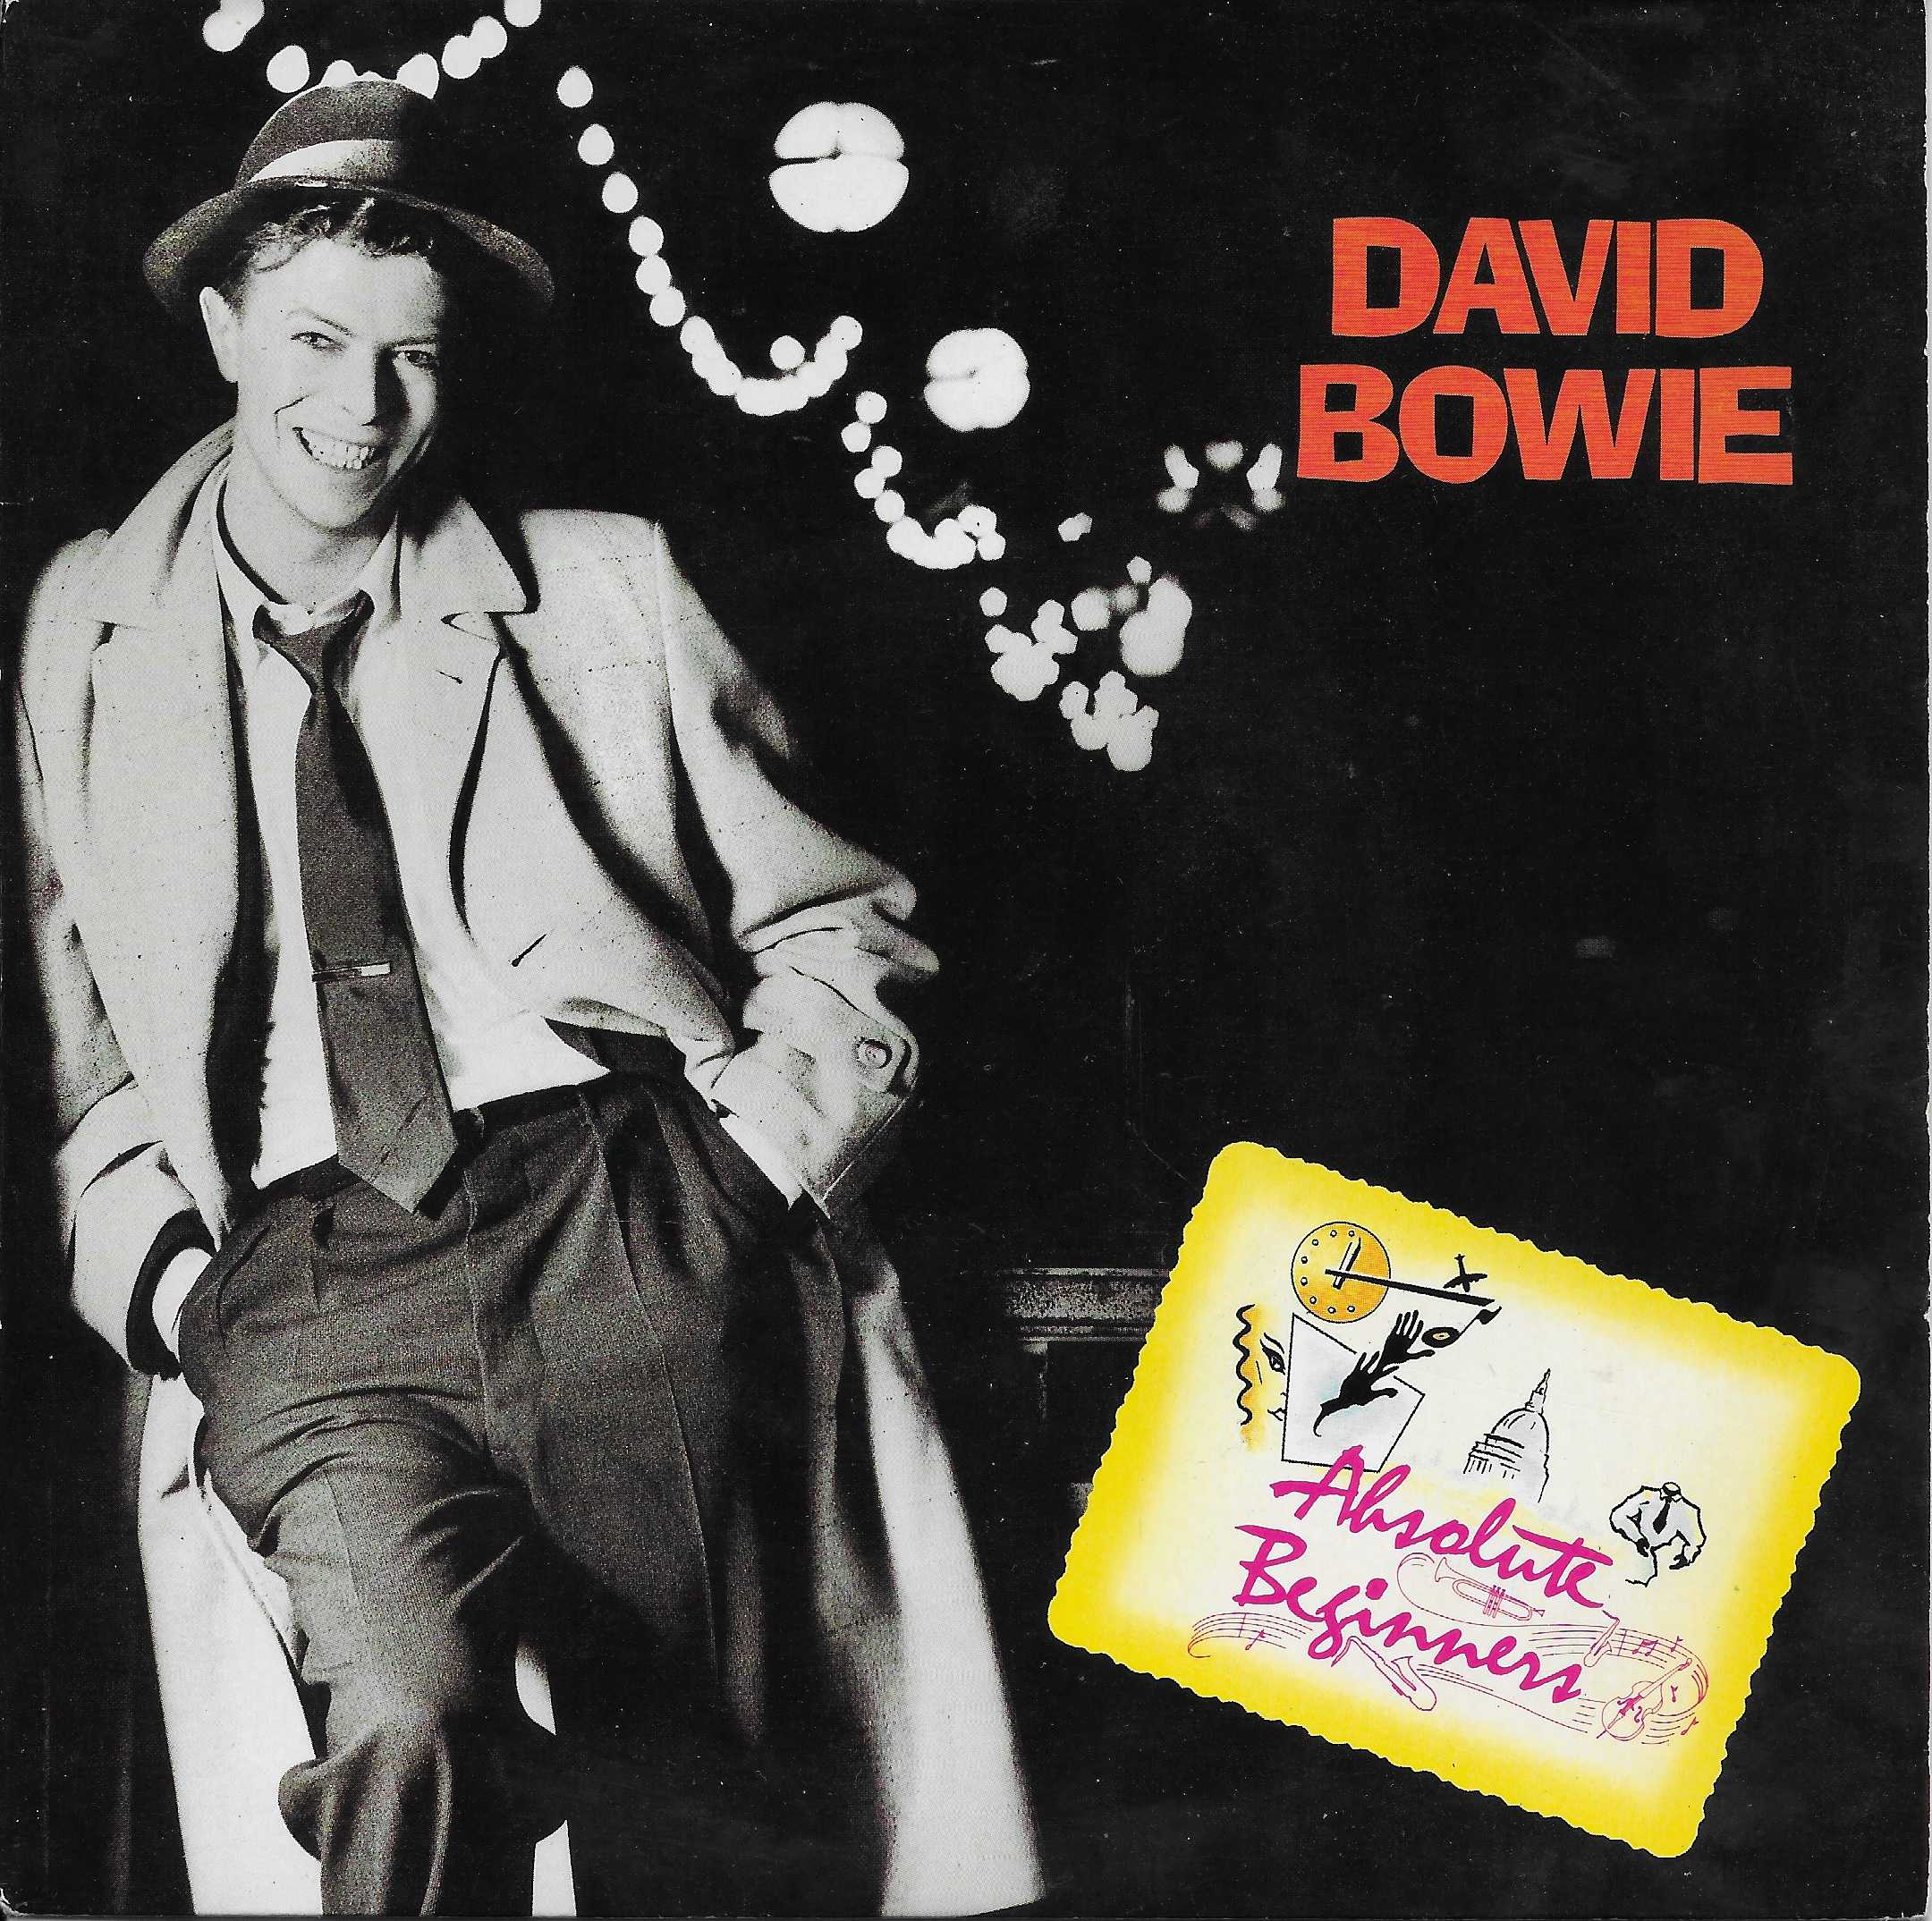 Picture of Absolute beginners by artist David Bowie from ITV, Channel 4 and Channel 5 singles library